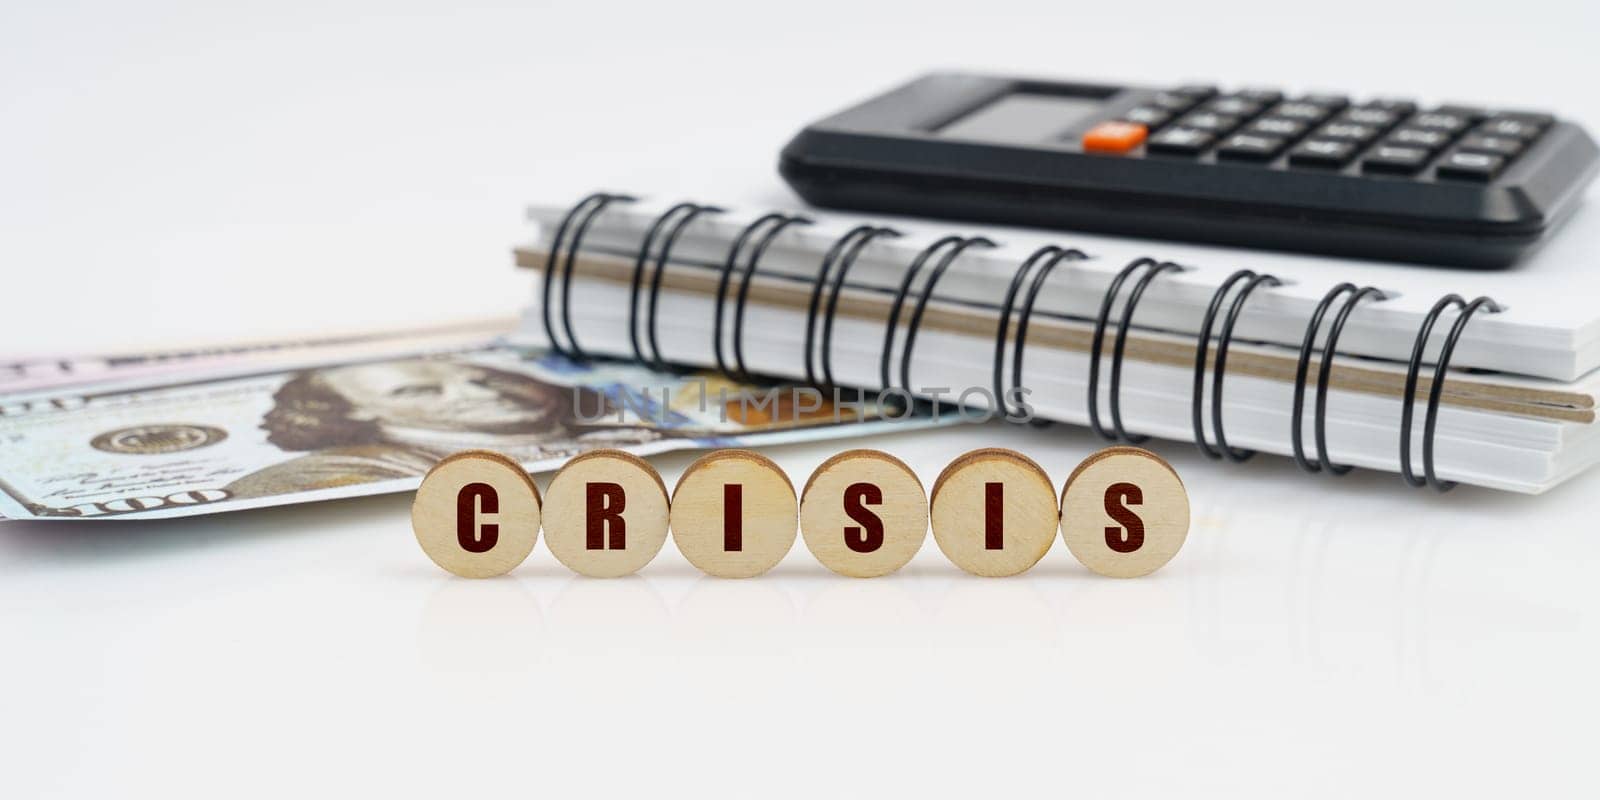 On a high surface lie a notepad, a calculator, dollars and wooden circles with the inscription - CRISIS by Sd28DimoN_1976